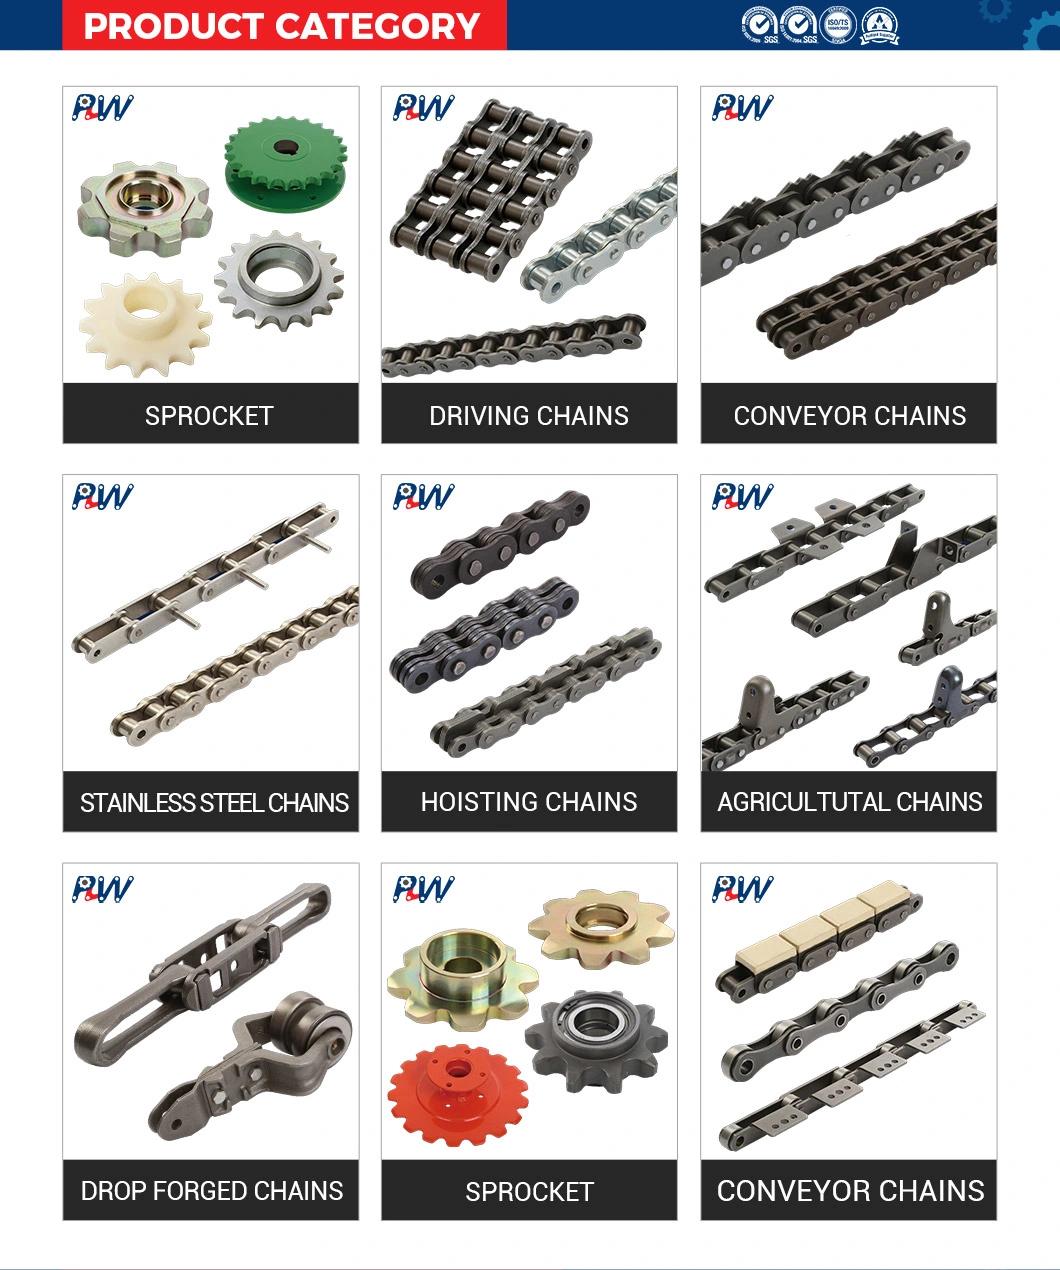 ISO 9001: 2008 Approved Made-to-Order Drop Forged Chain (998, S348)